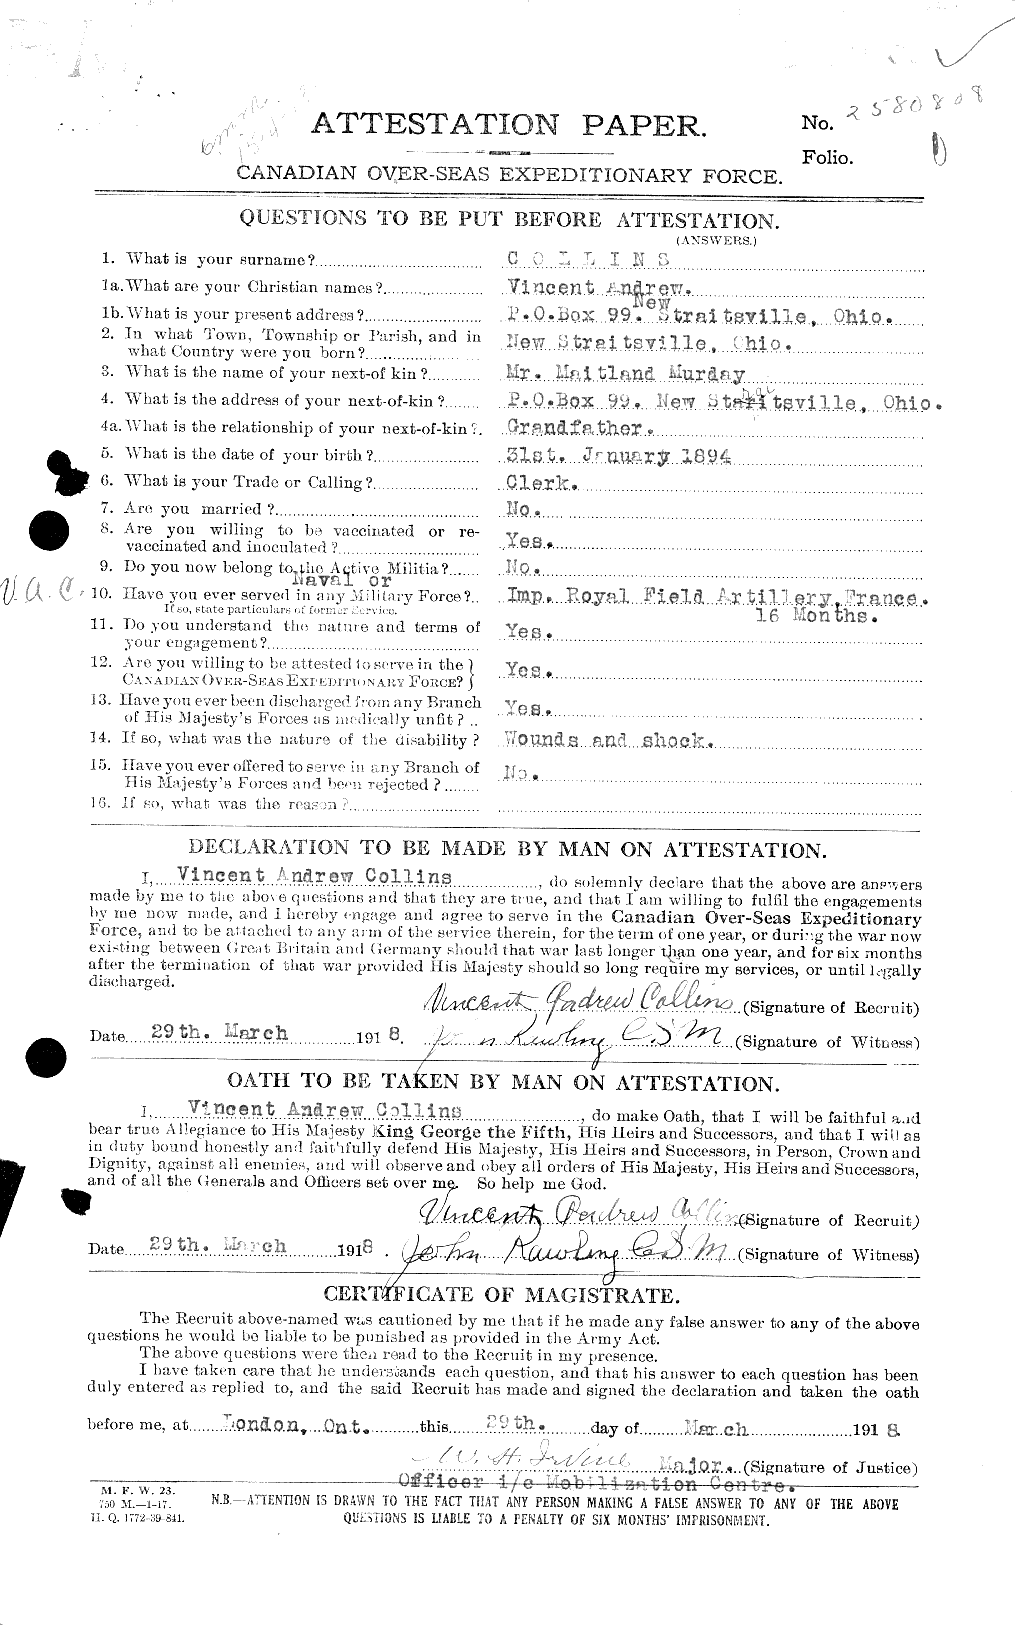 Personnel Records of the First World War - CEF 040685a